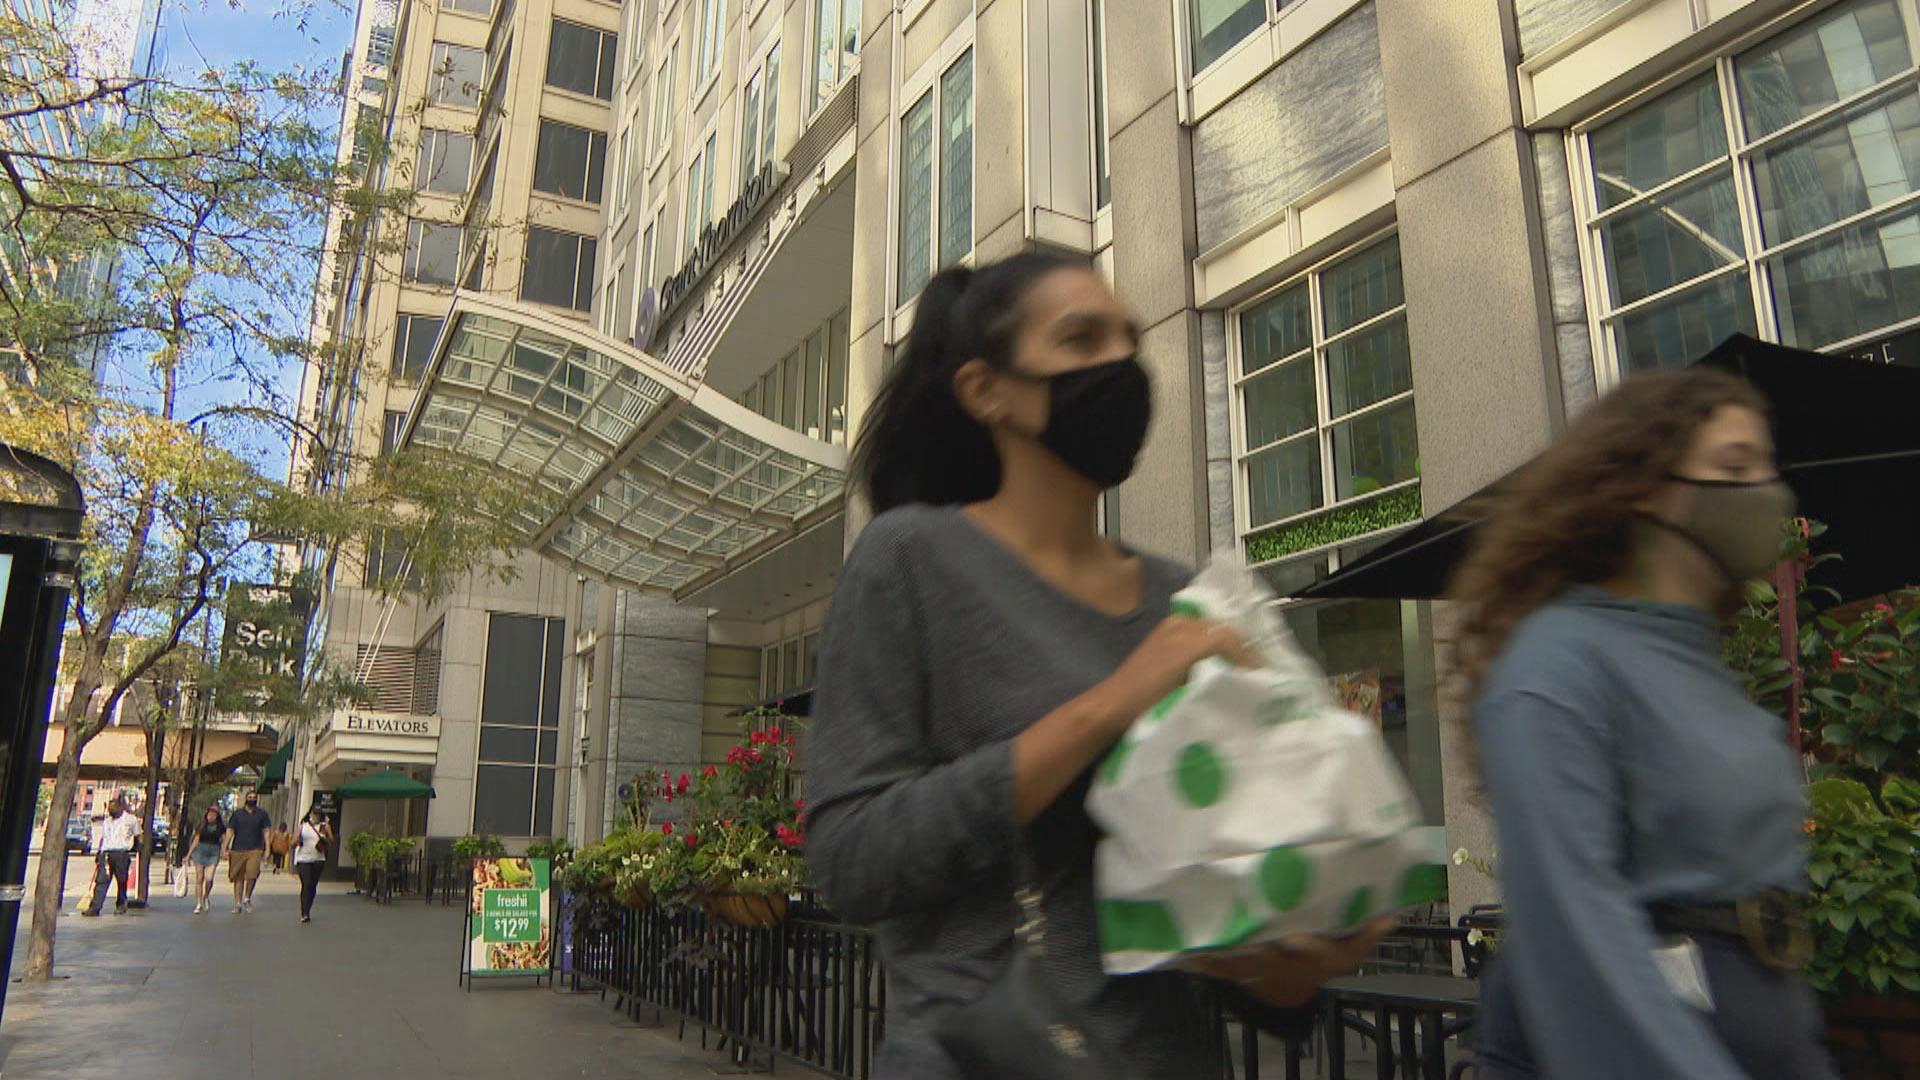 People wearing face masks walk along a street in downtown Chicago on Sept. 2, 2020. (WTTW News)